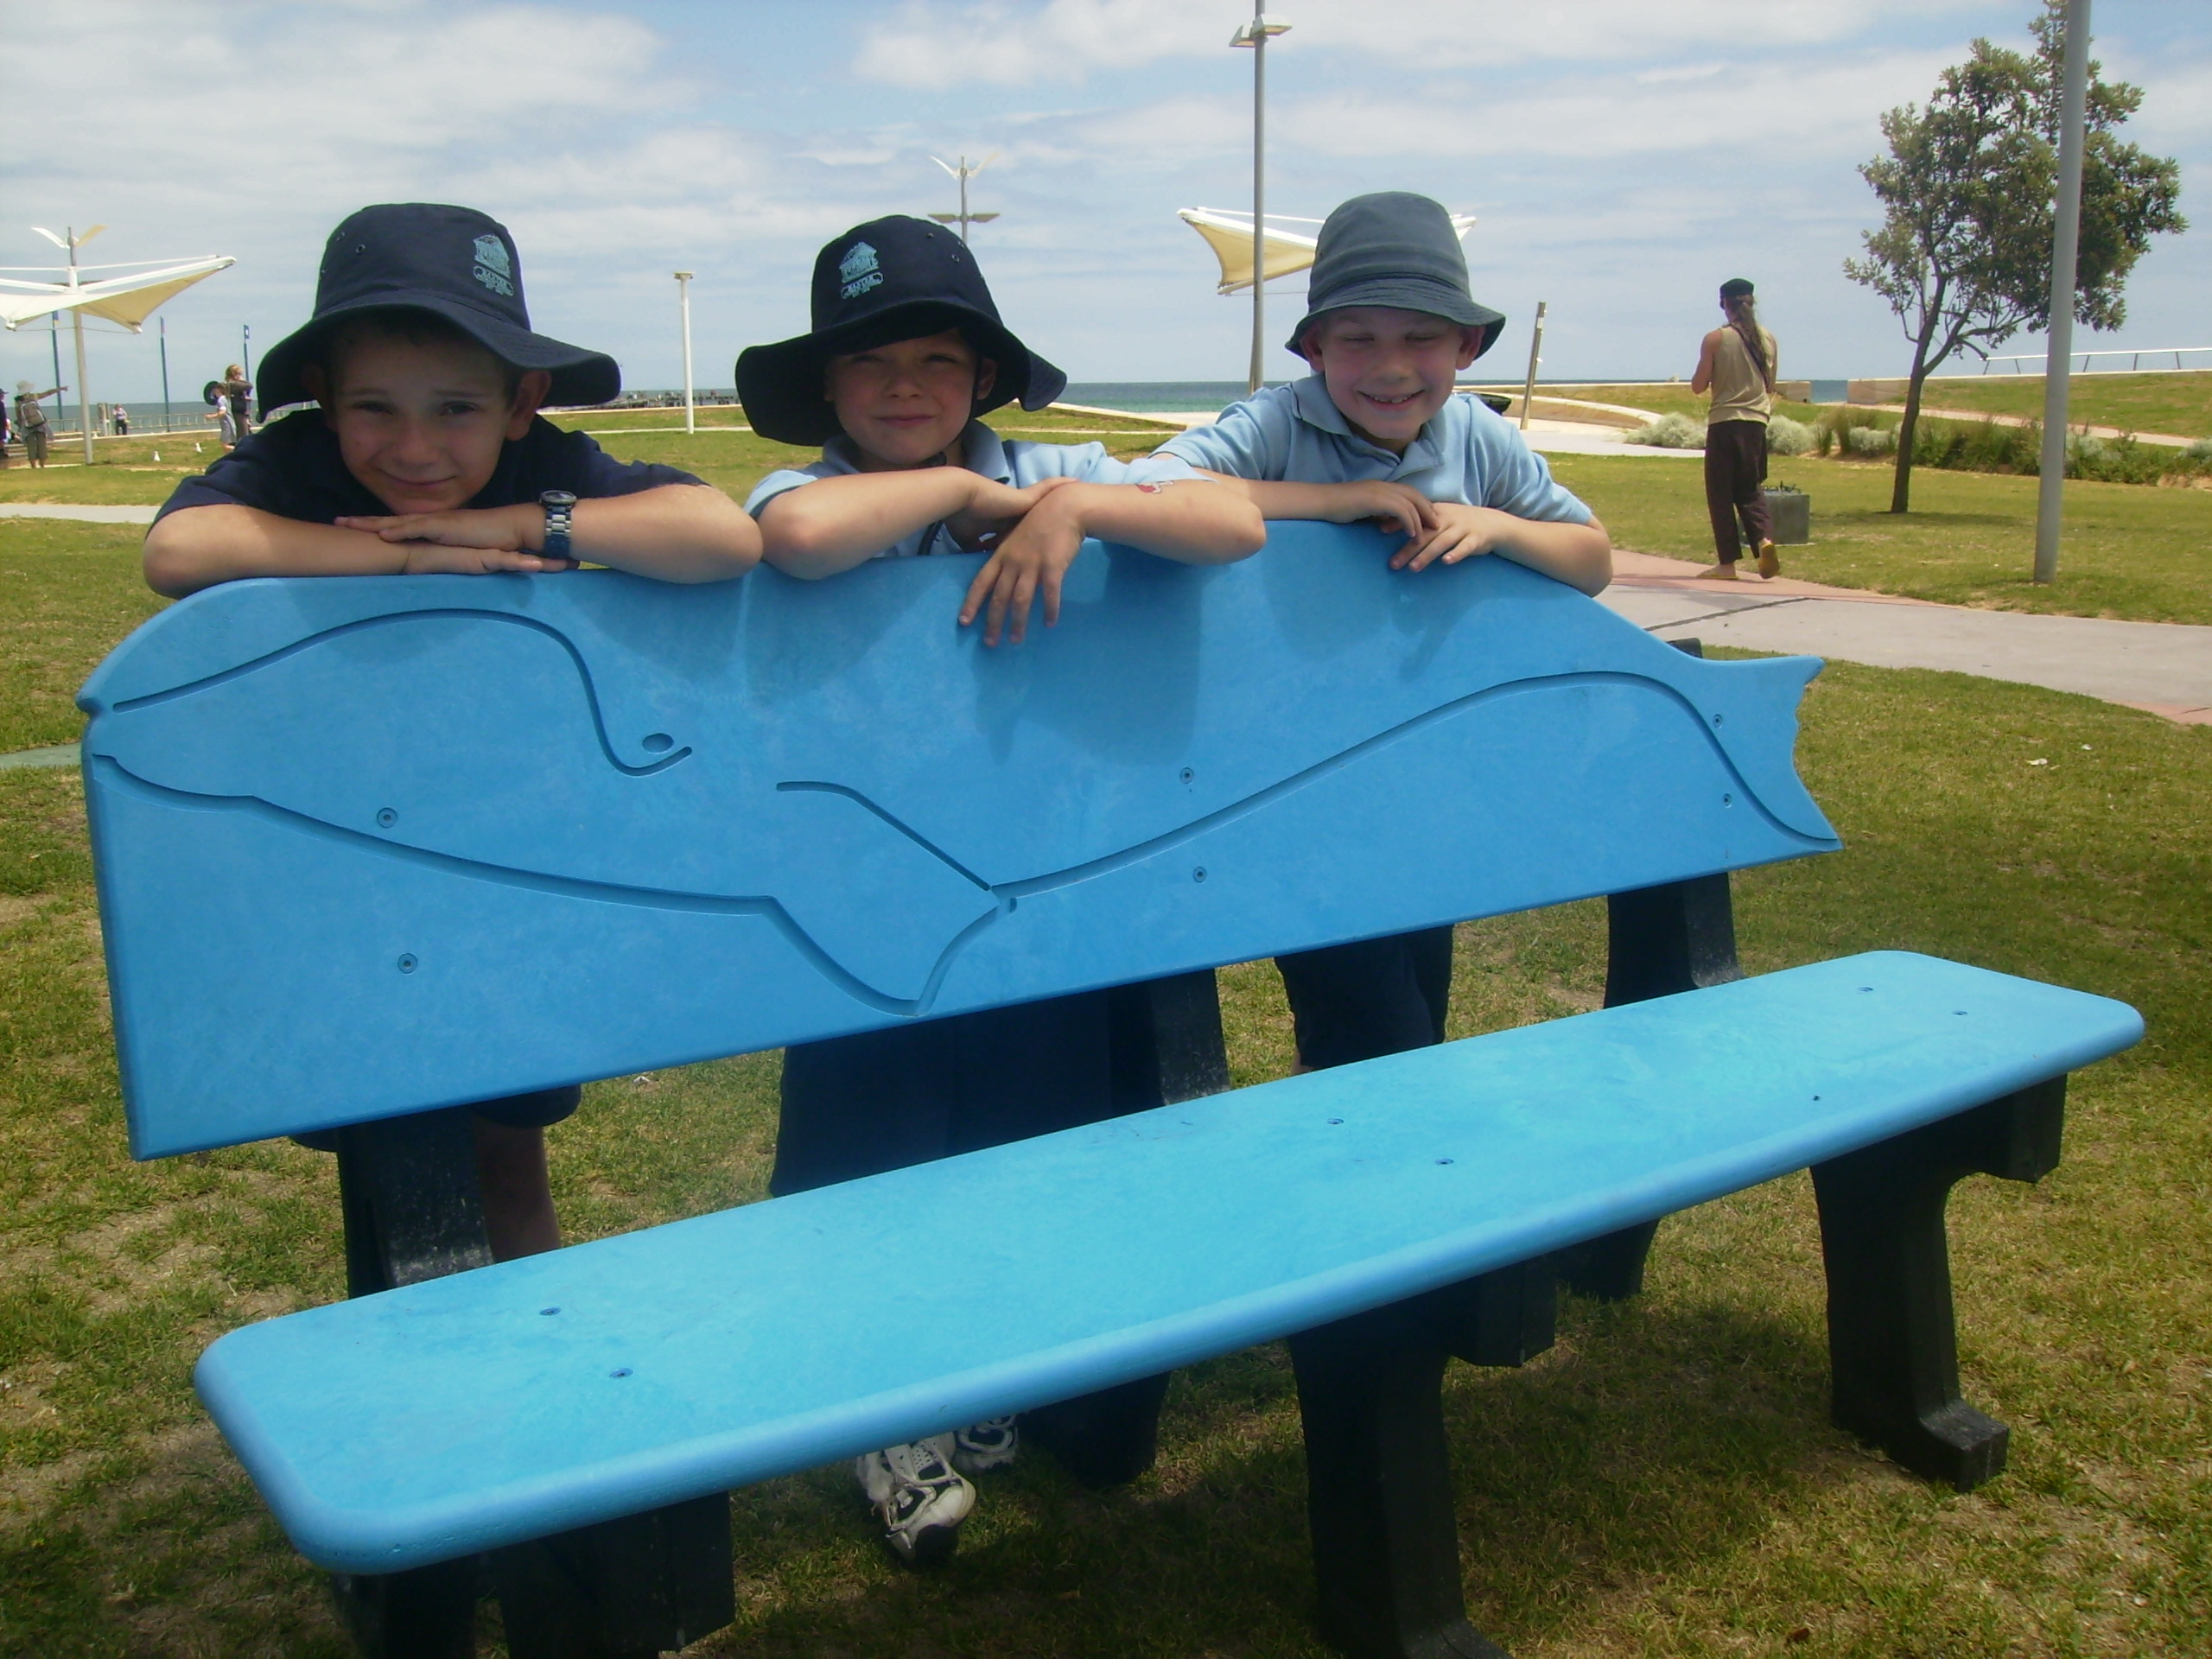 Get creative to win your school a new bench made from plastic bags